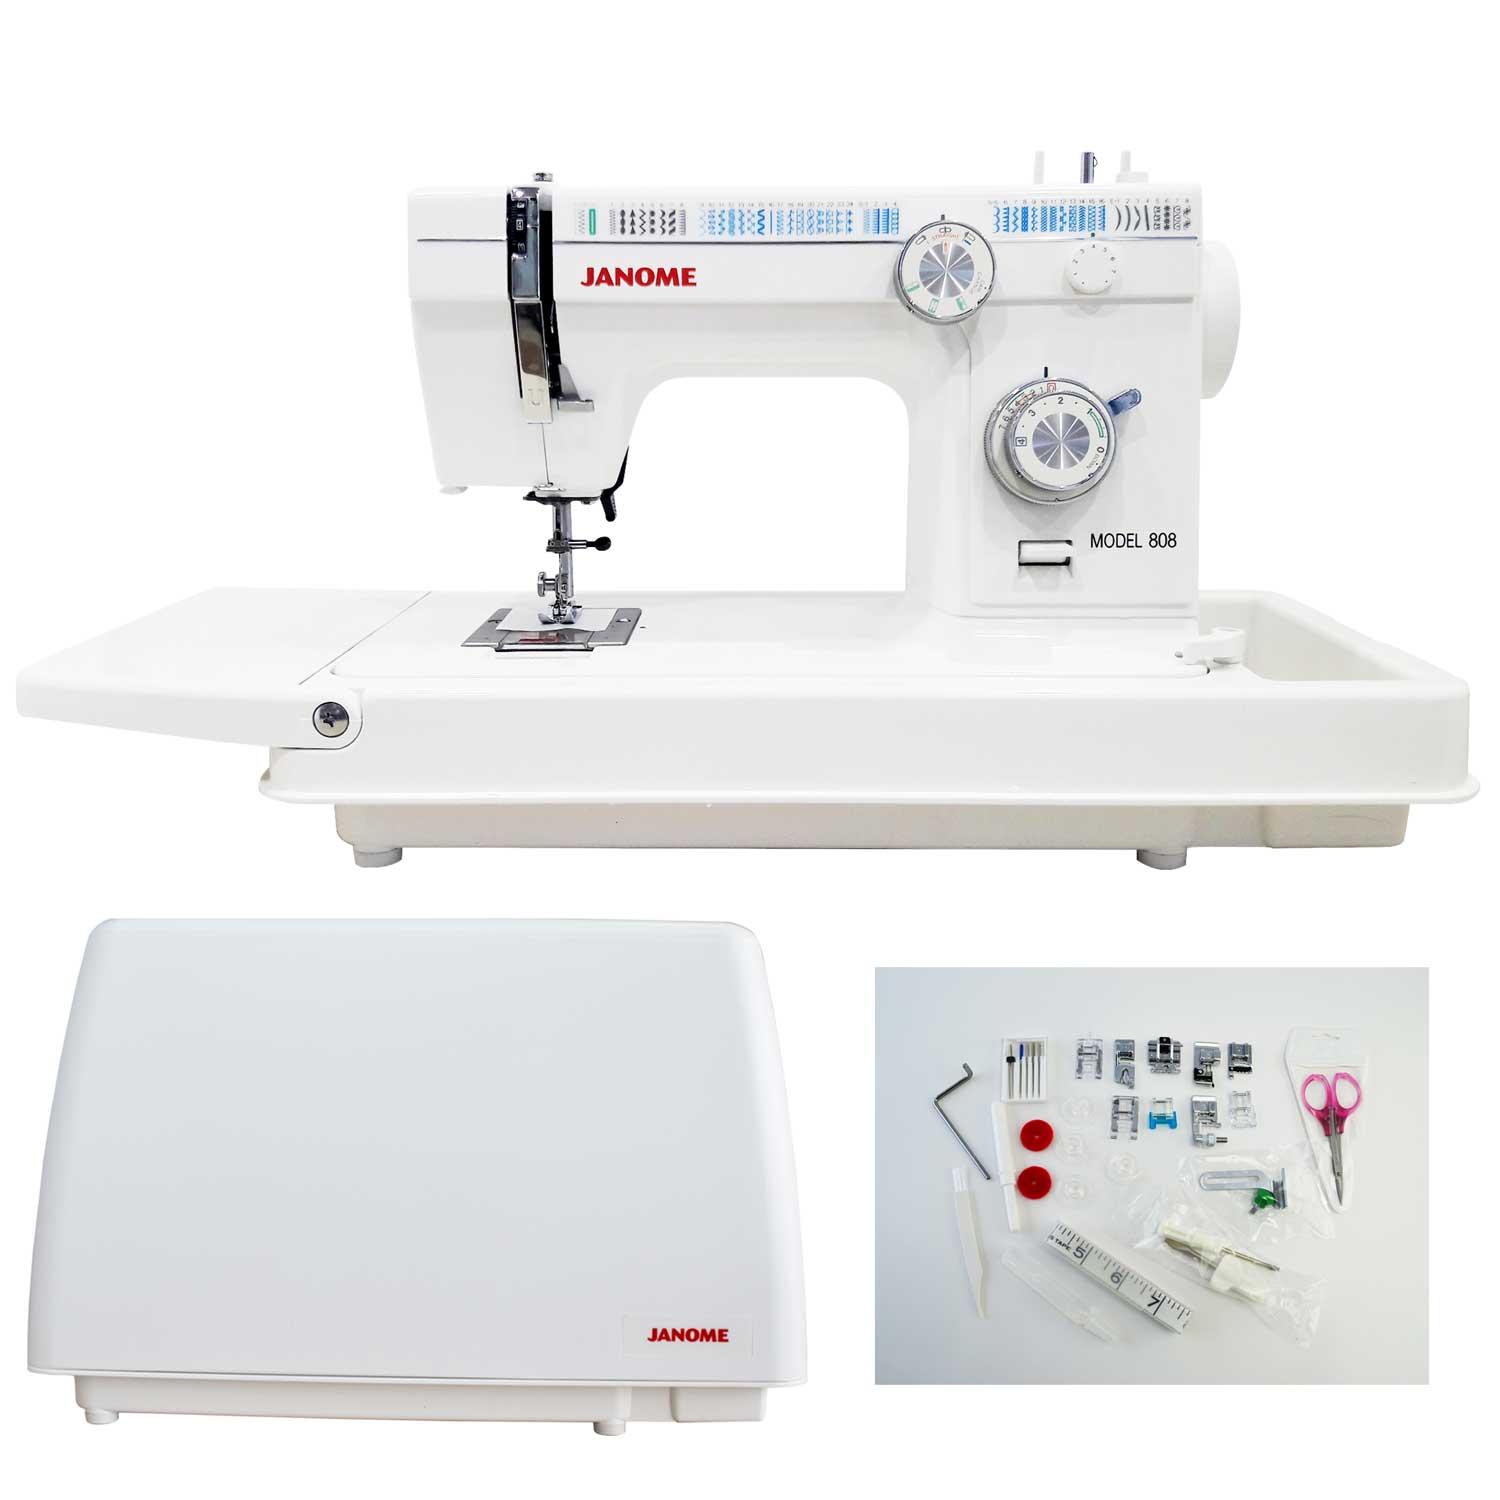 Janome-808-with-box-01